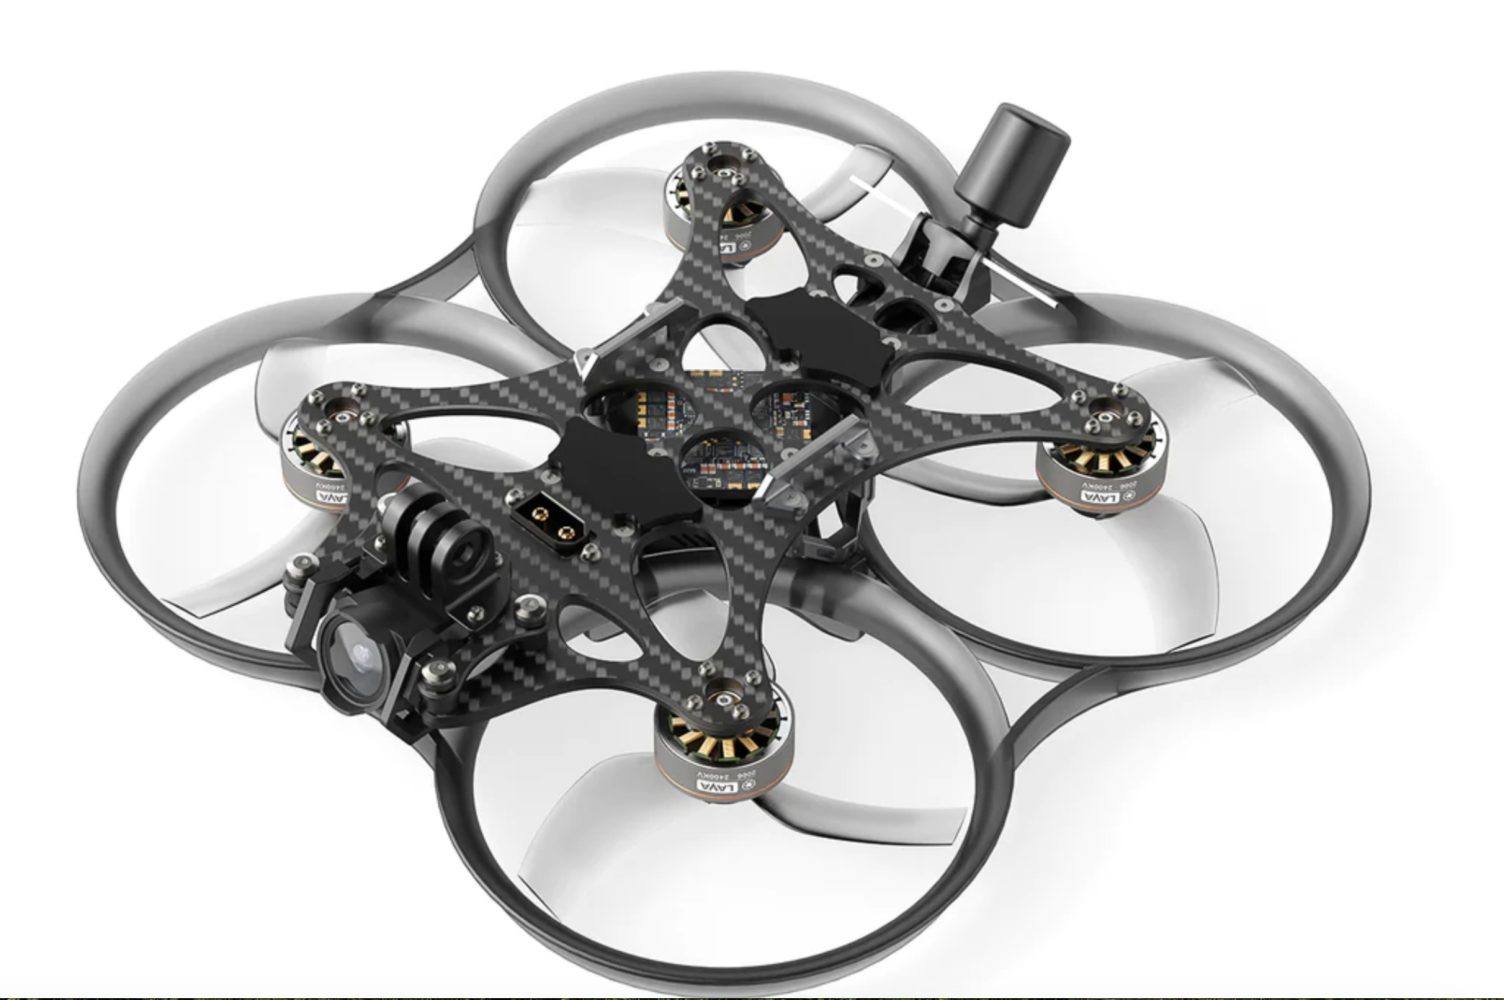 Should I buy an FPV drone in the Black Friday deals?